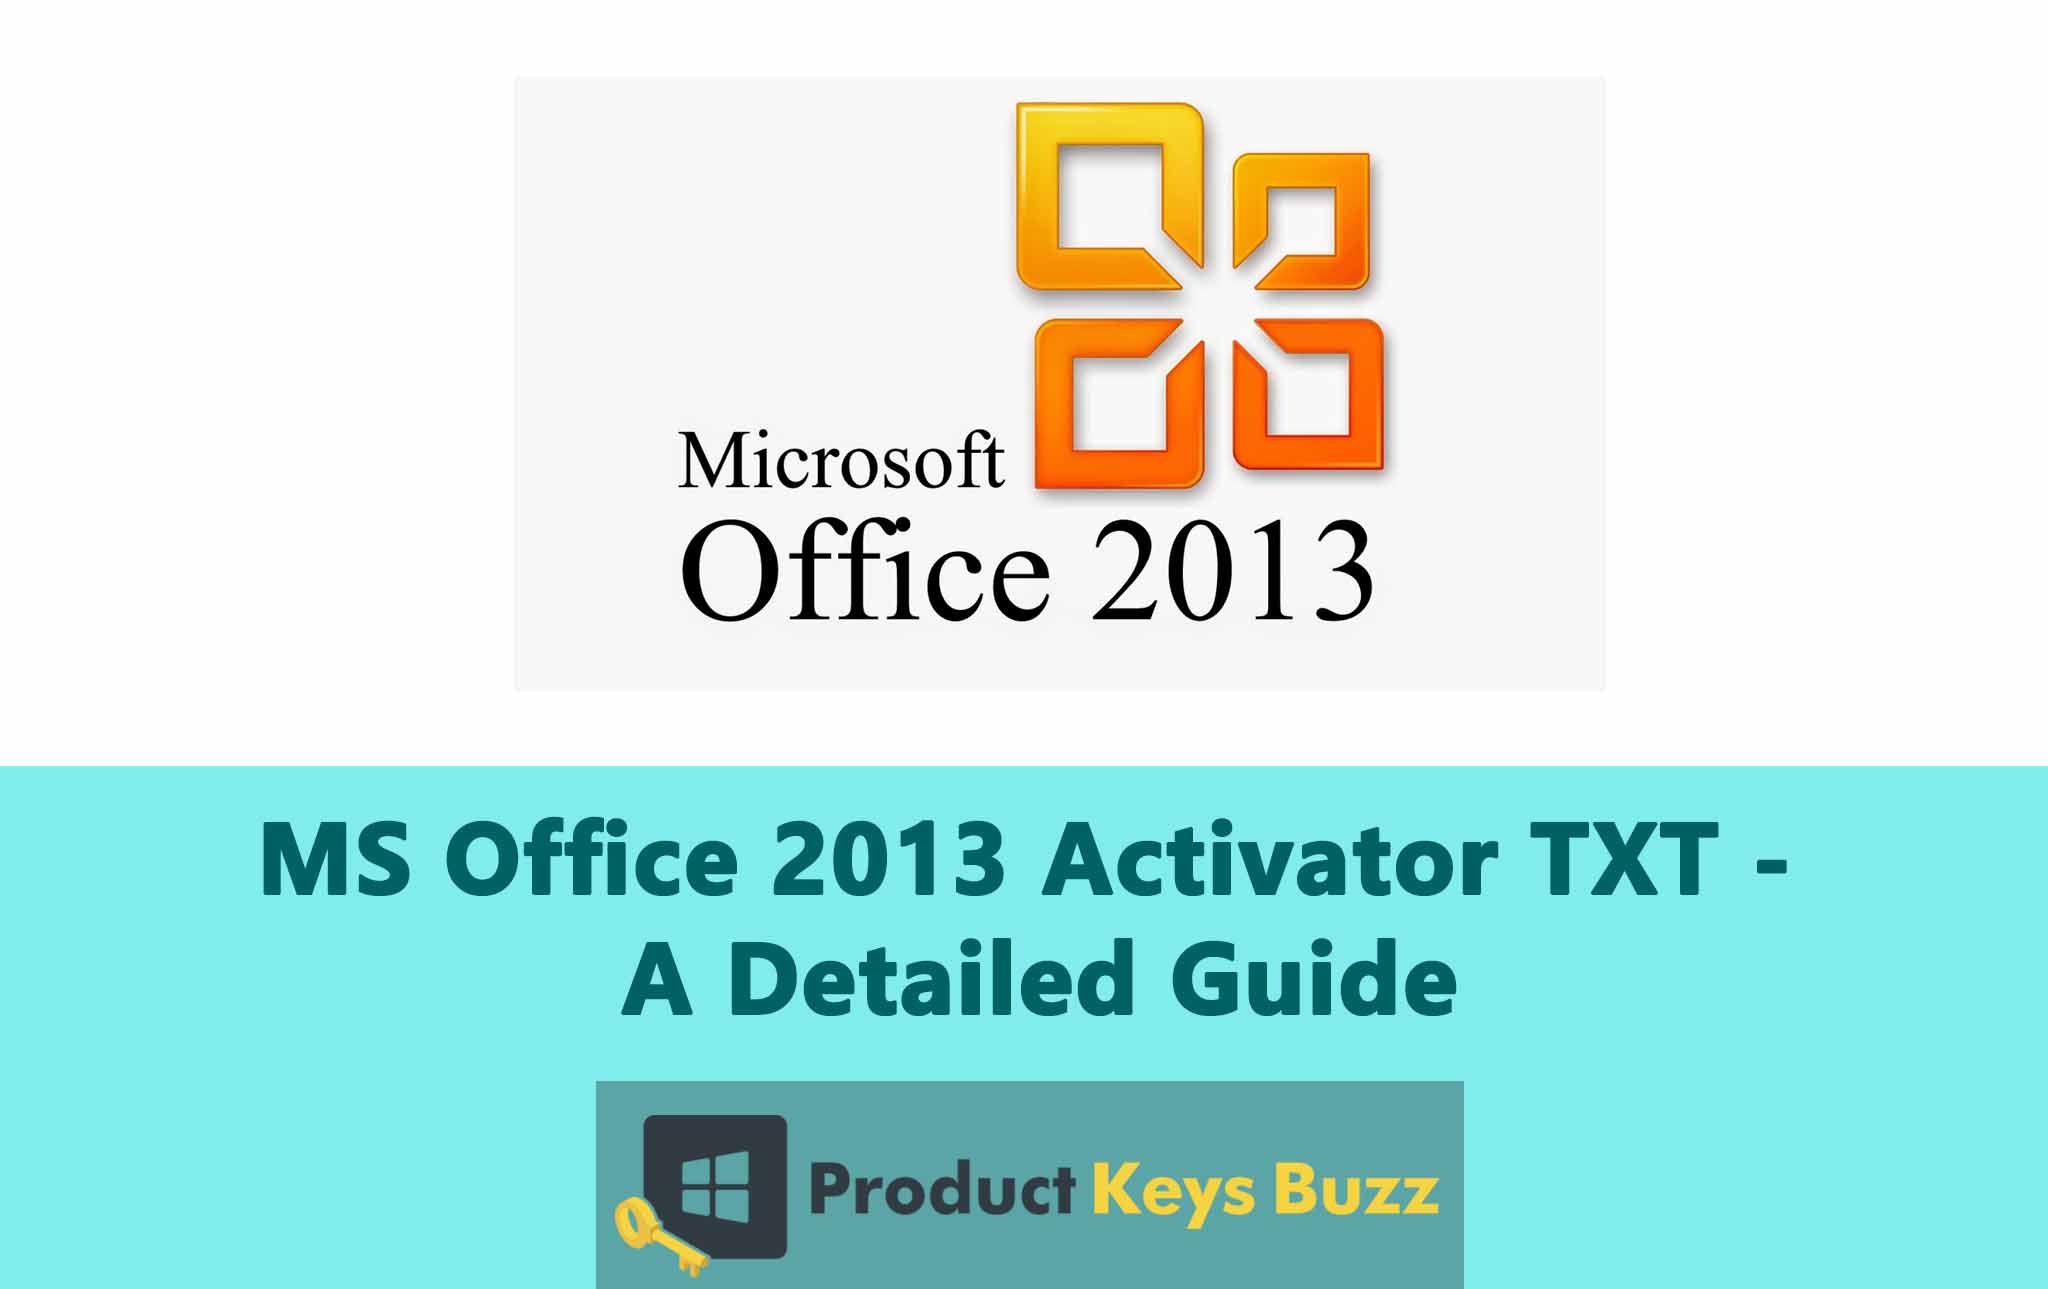 MS Office 2013 Activator TXT